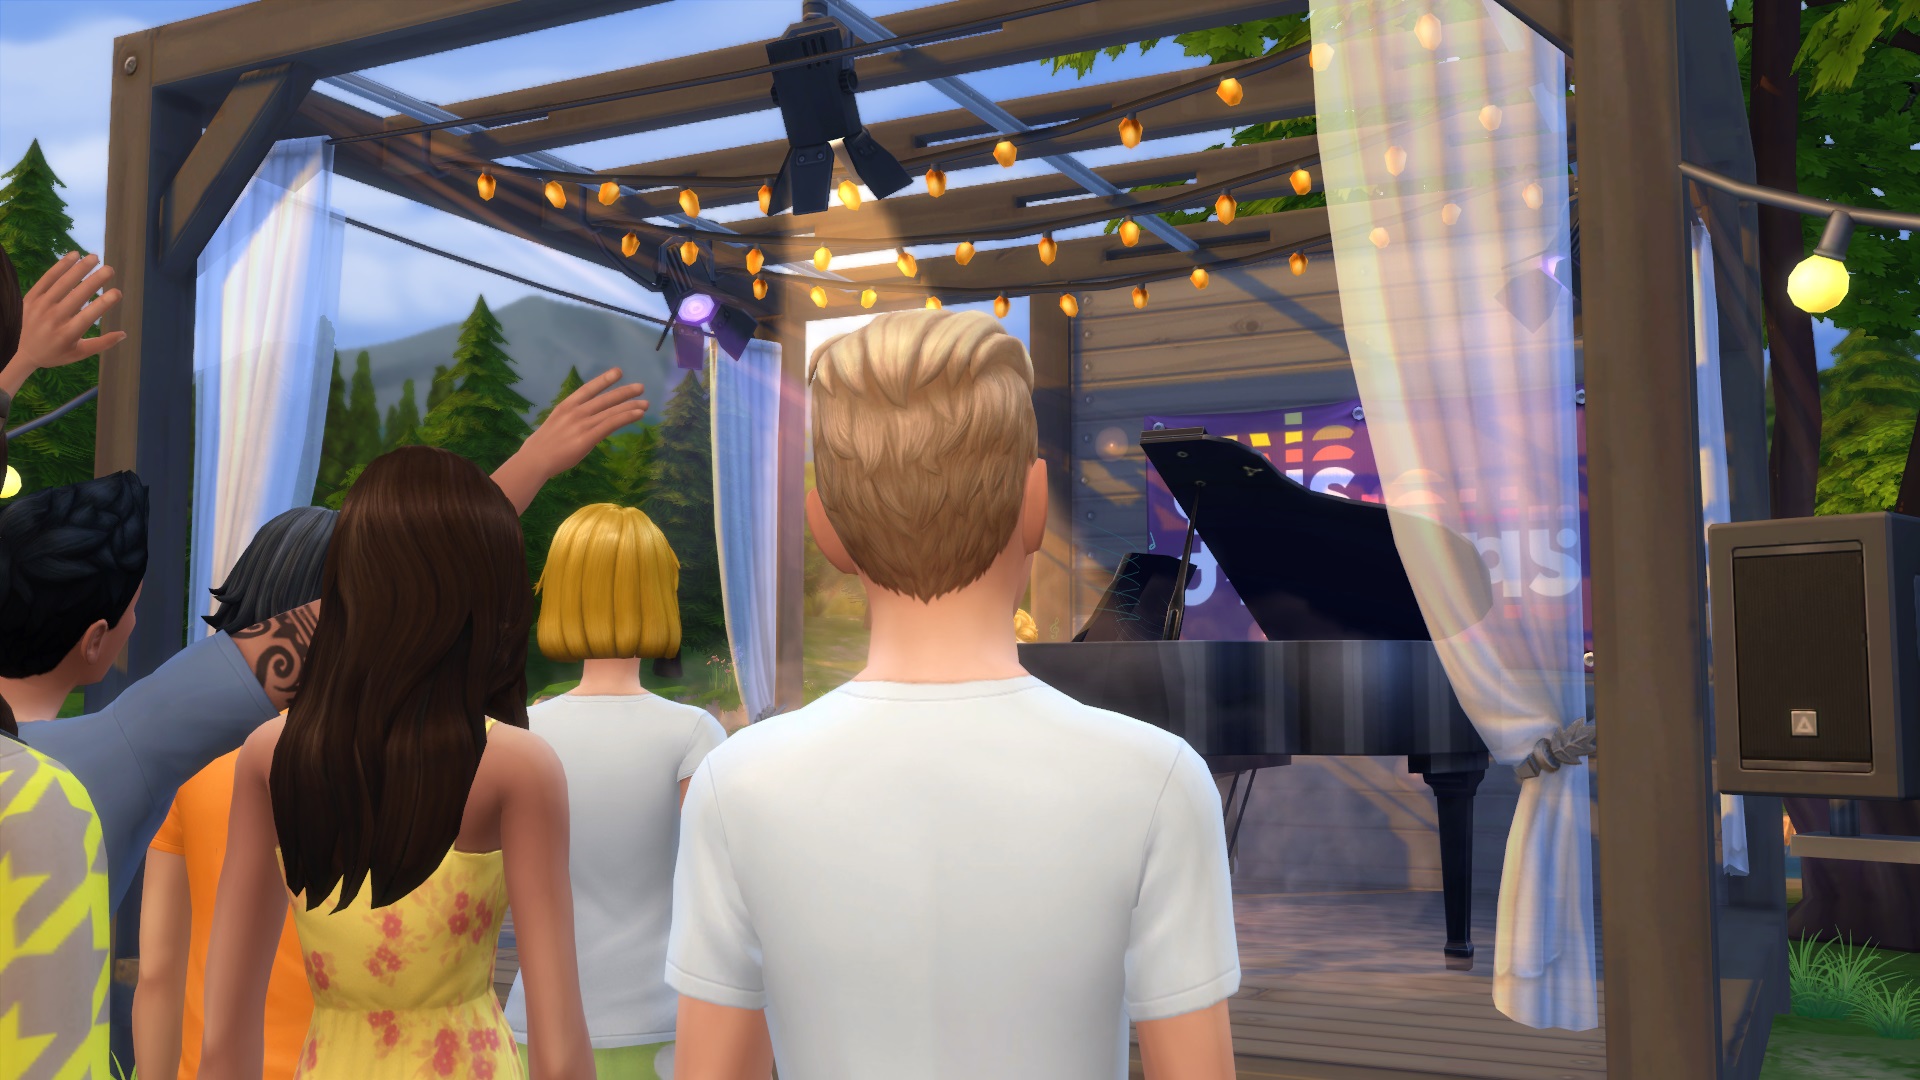 An in-game photo of the Sims Sessions stage, but a Sim blocks the view.